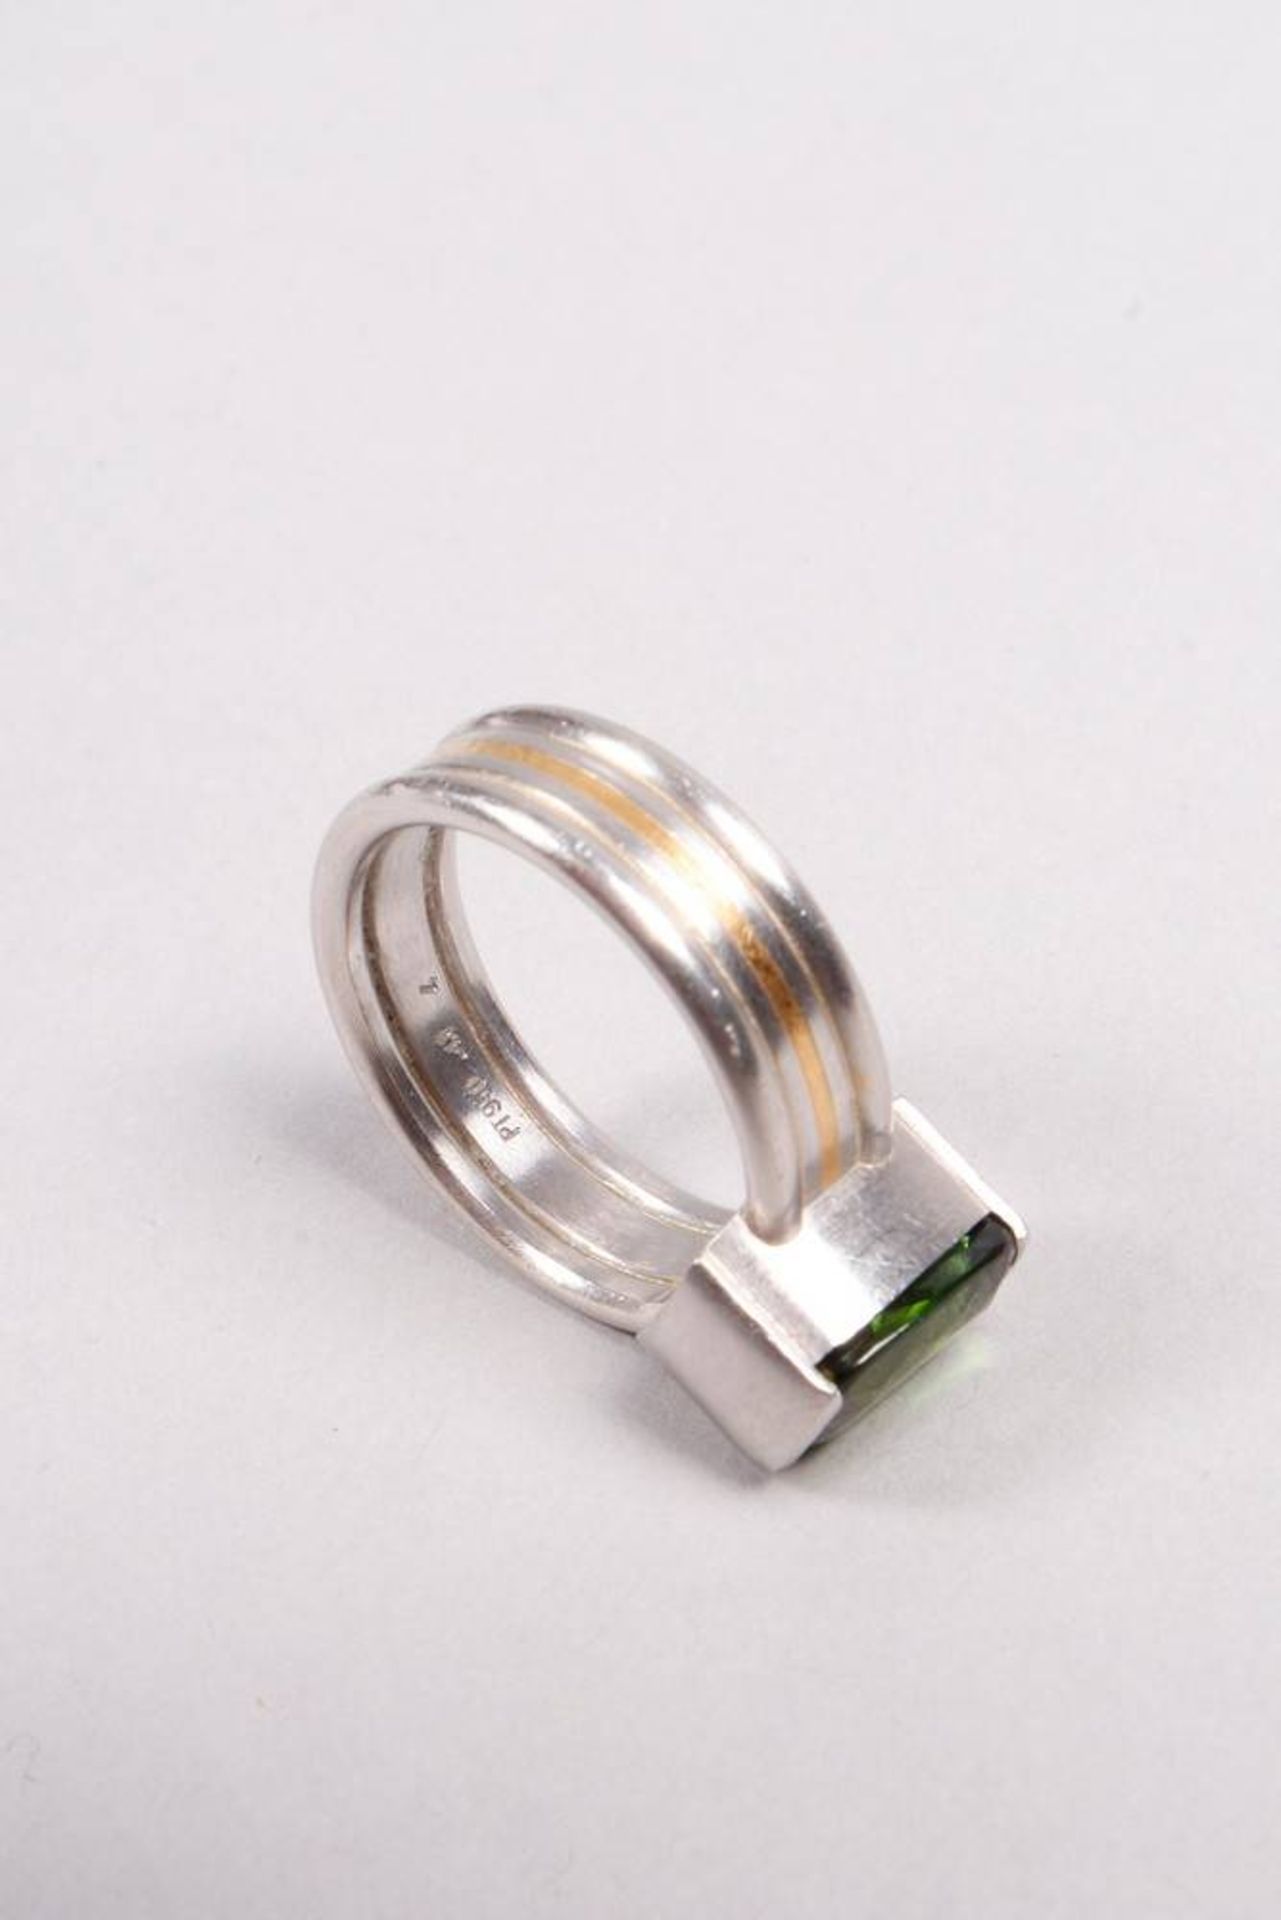 Very fine peridot ring, platinum and gold - Image 4 of 4